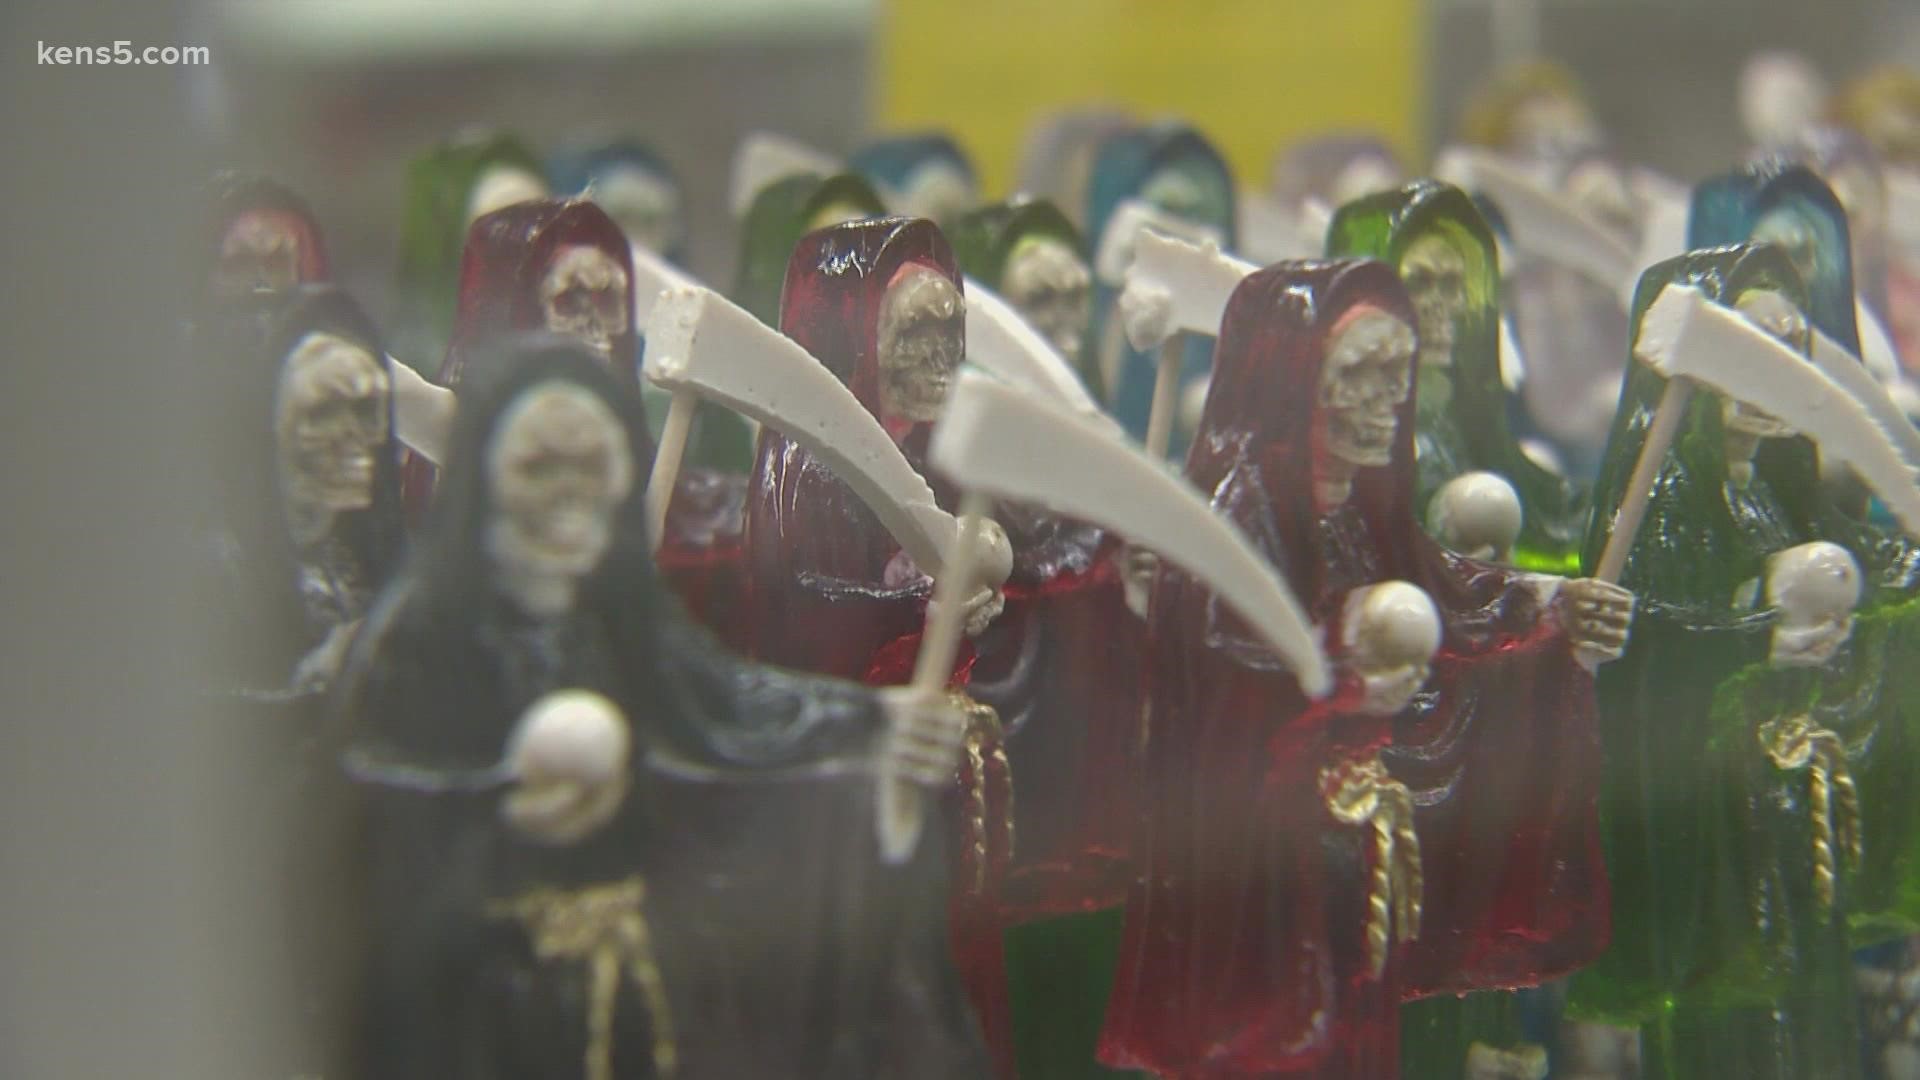 KENS 5 dives into the history of the Santa Muerte, and uncovers a complex figure.